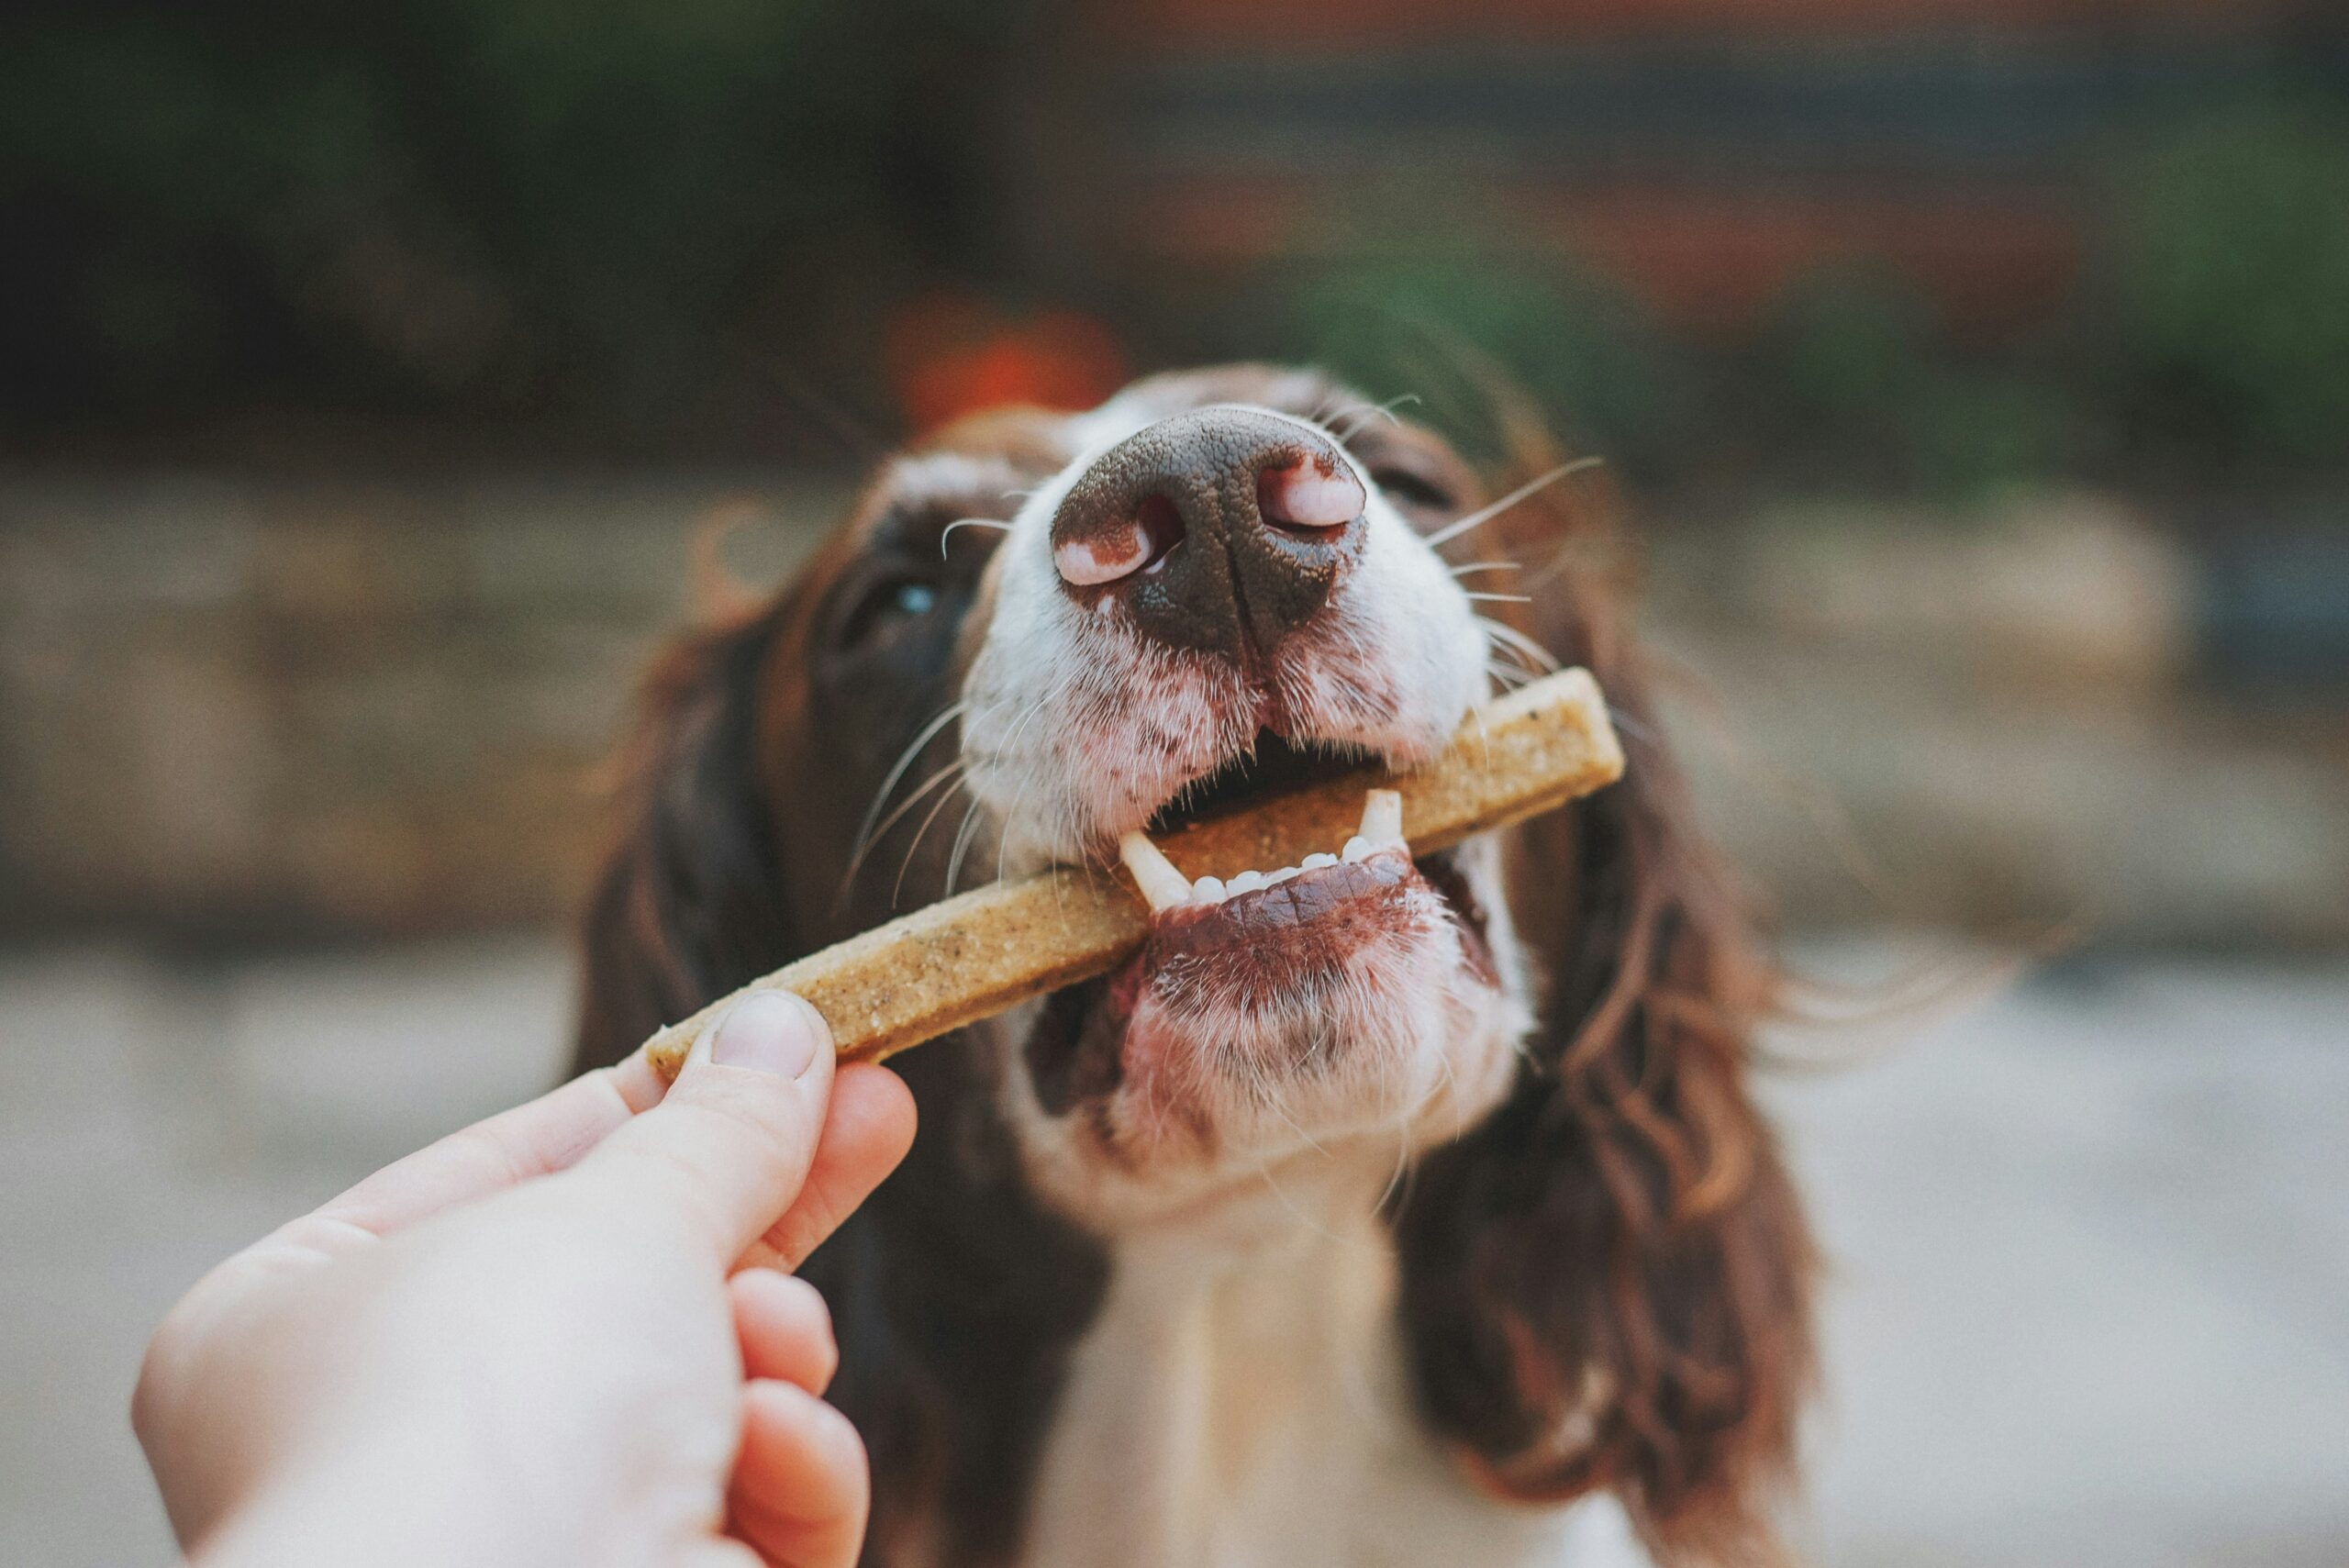 Homemade Dog Treats image by James Lacy